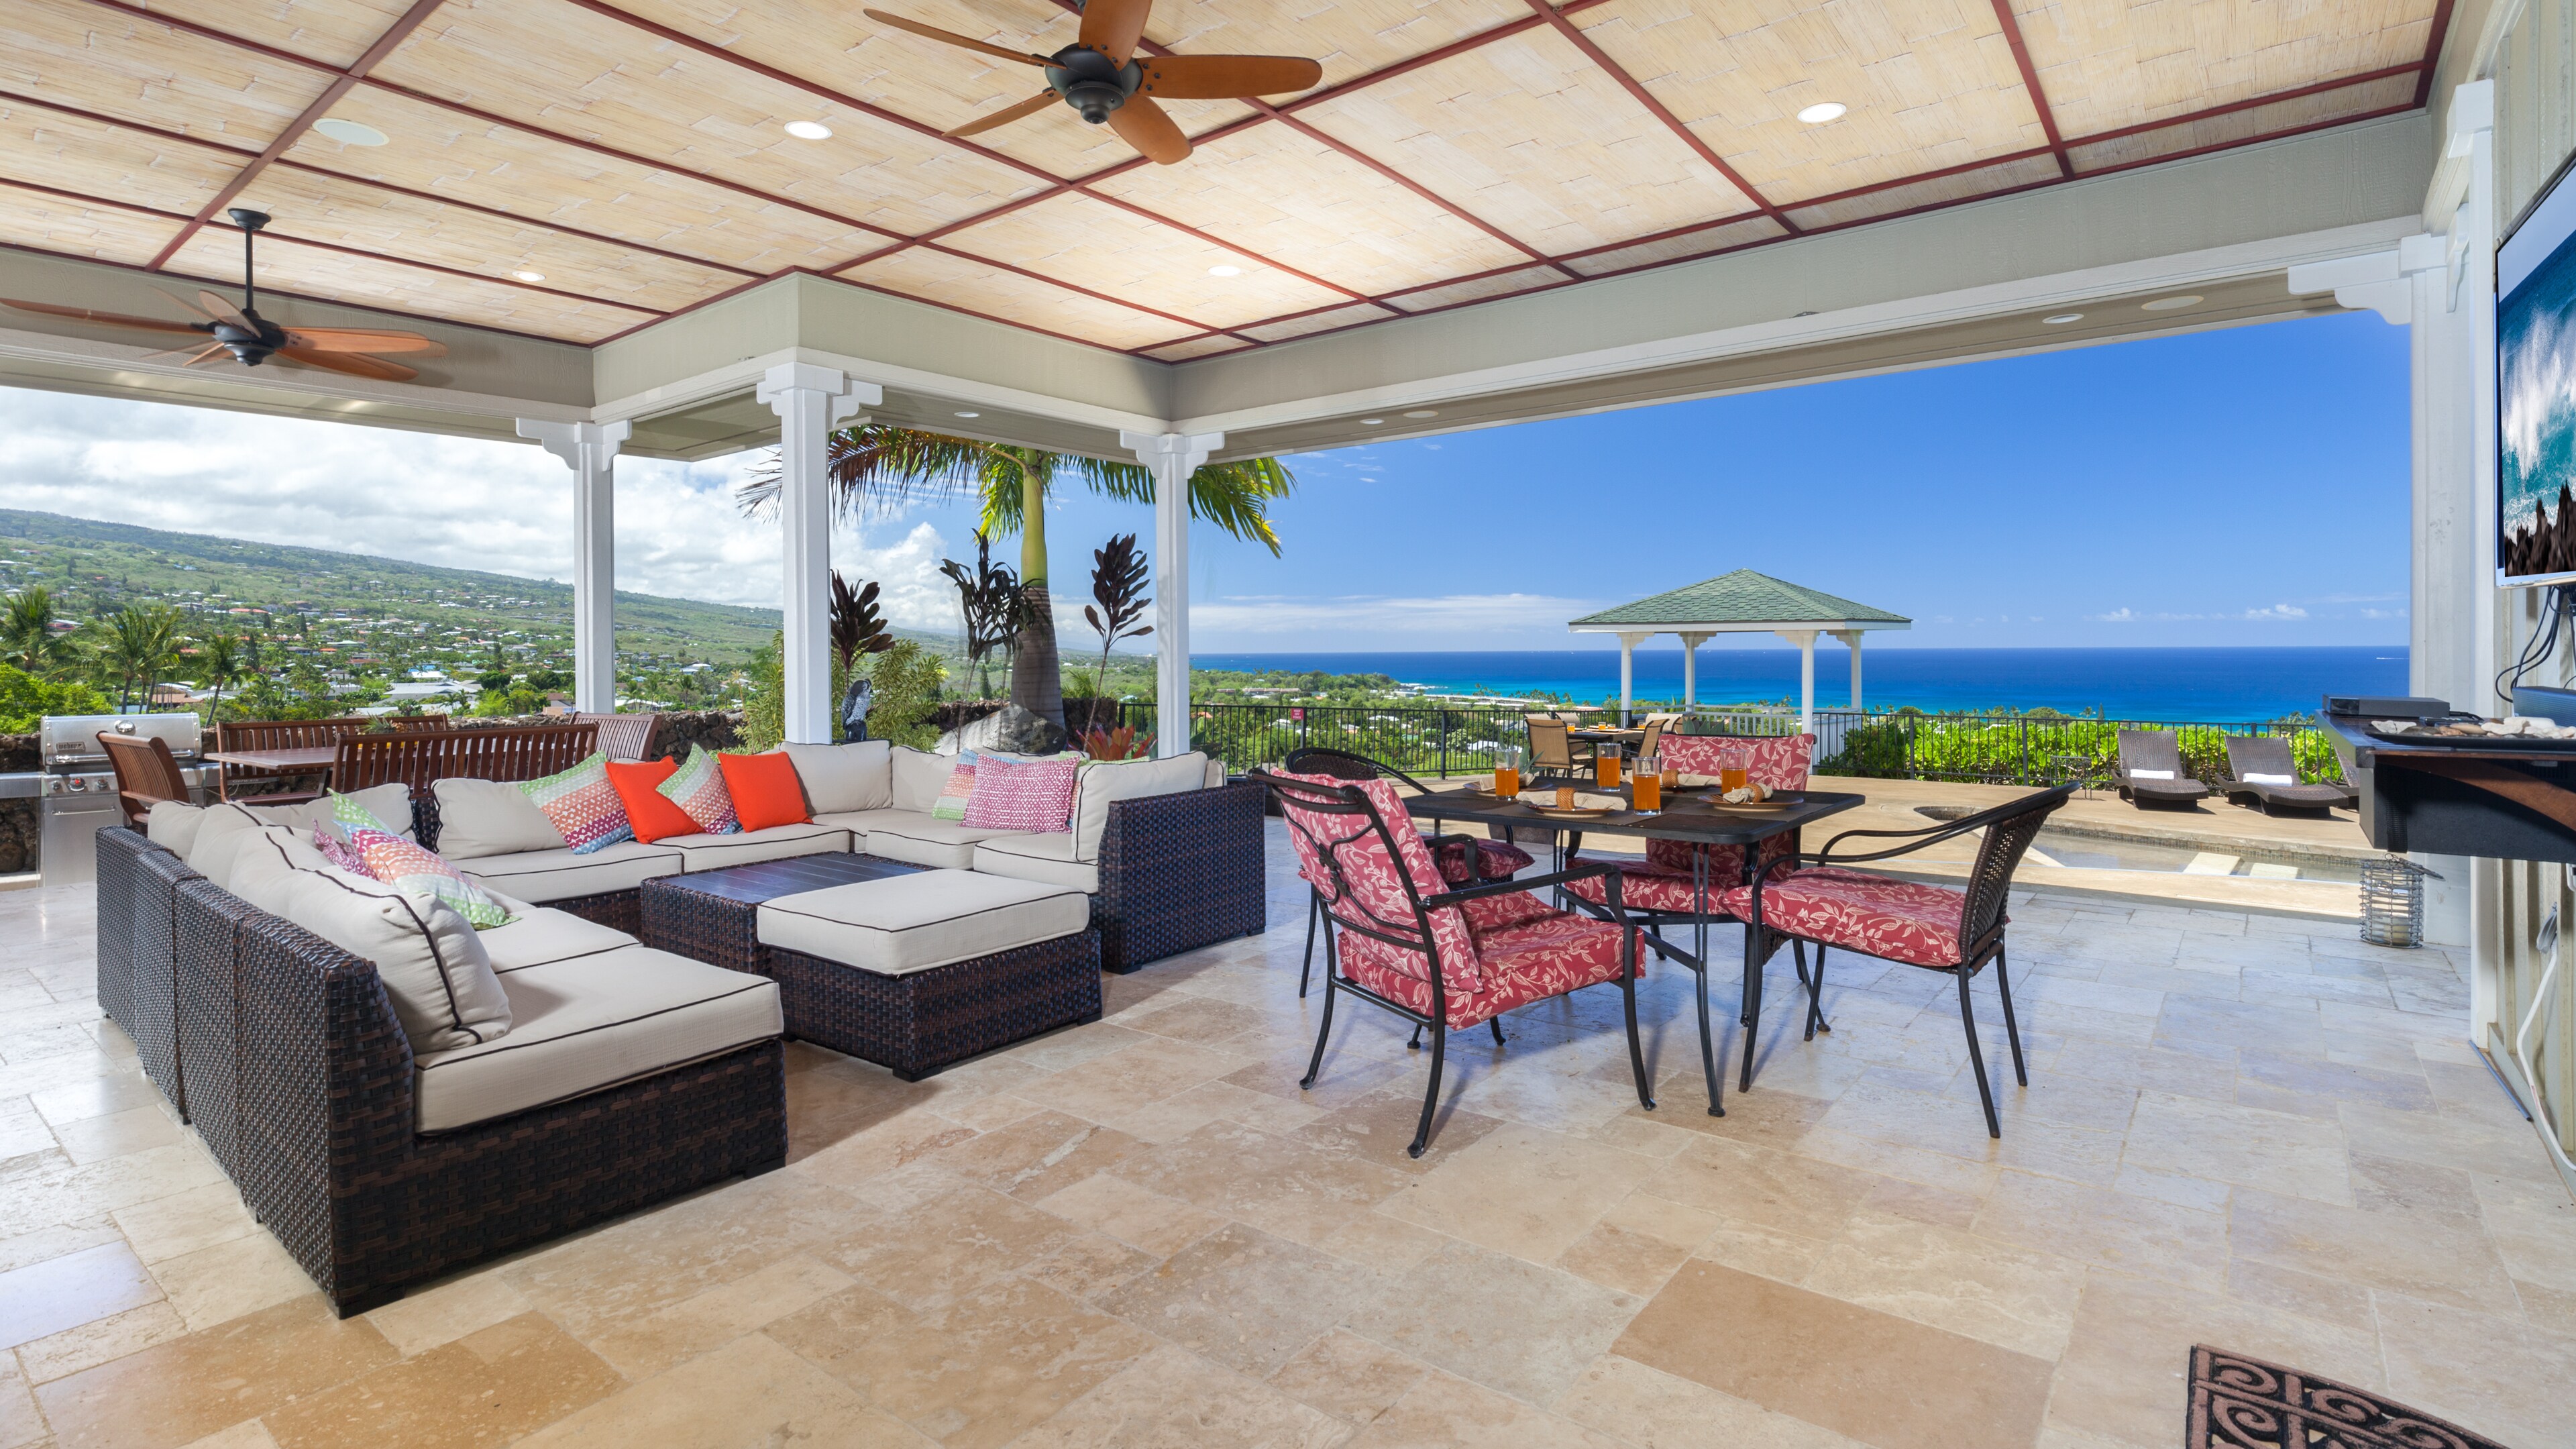 Large Covered Lanai with stunning ocean view and multiple outdoor tables for dining or games night